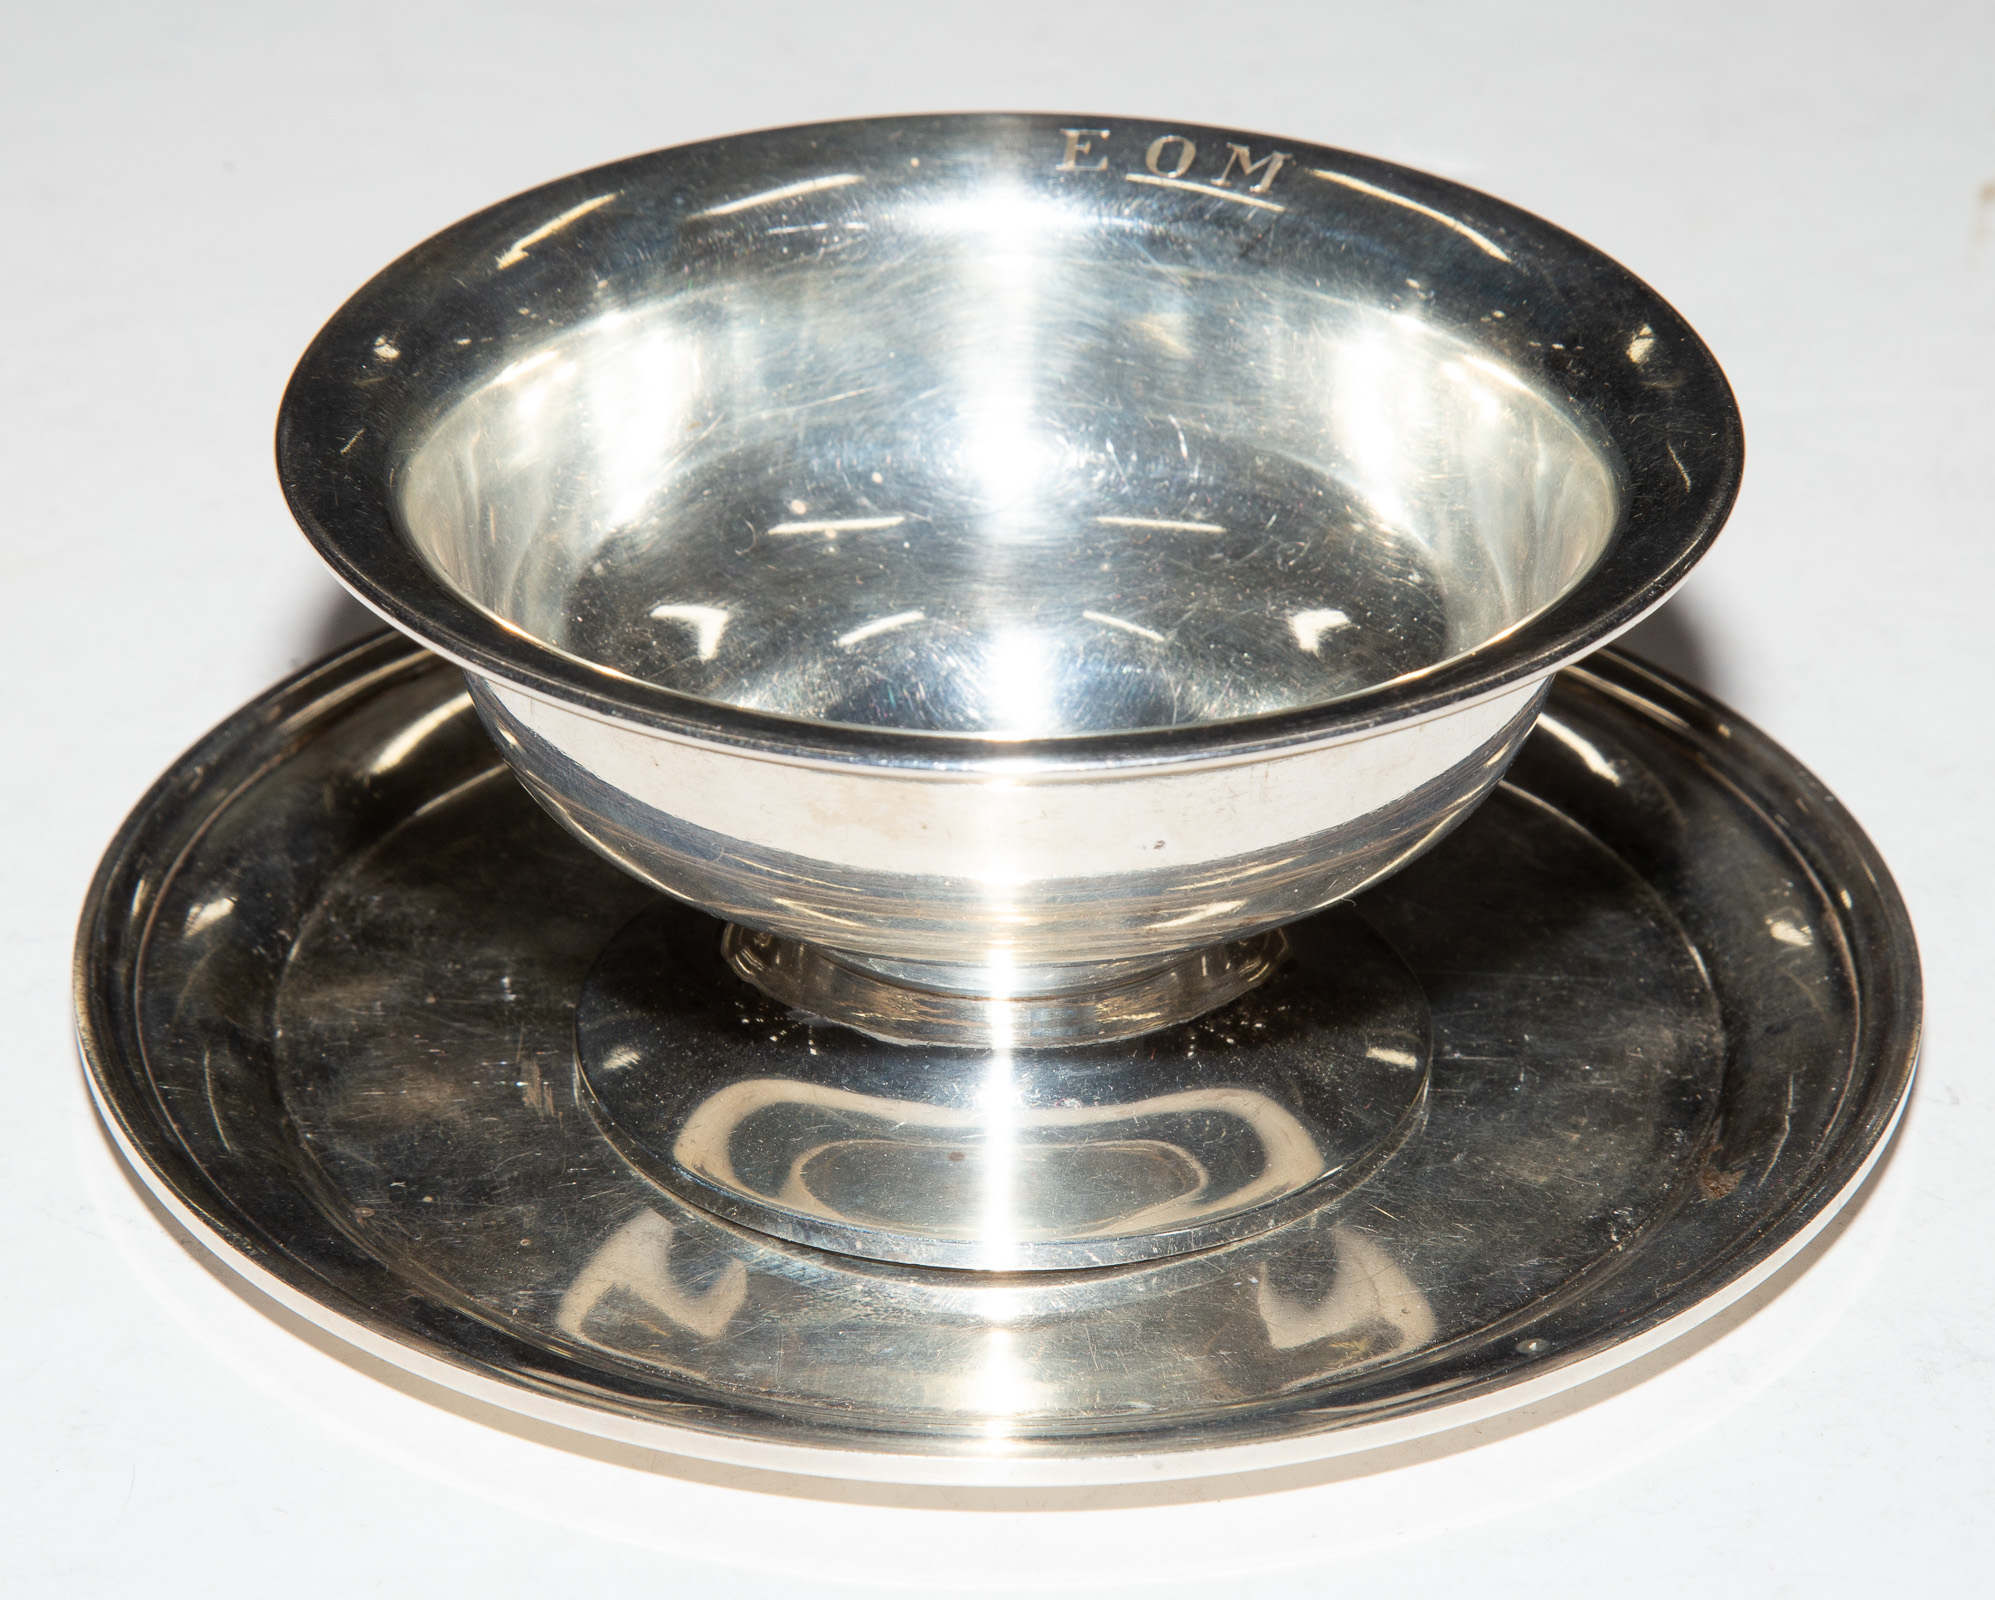 S KIRK SON CO STERLING TRAY 3384d2